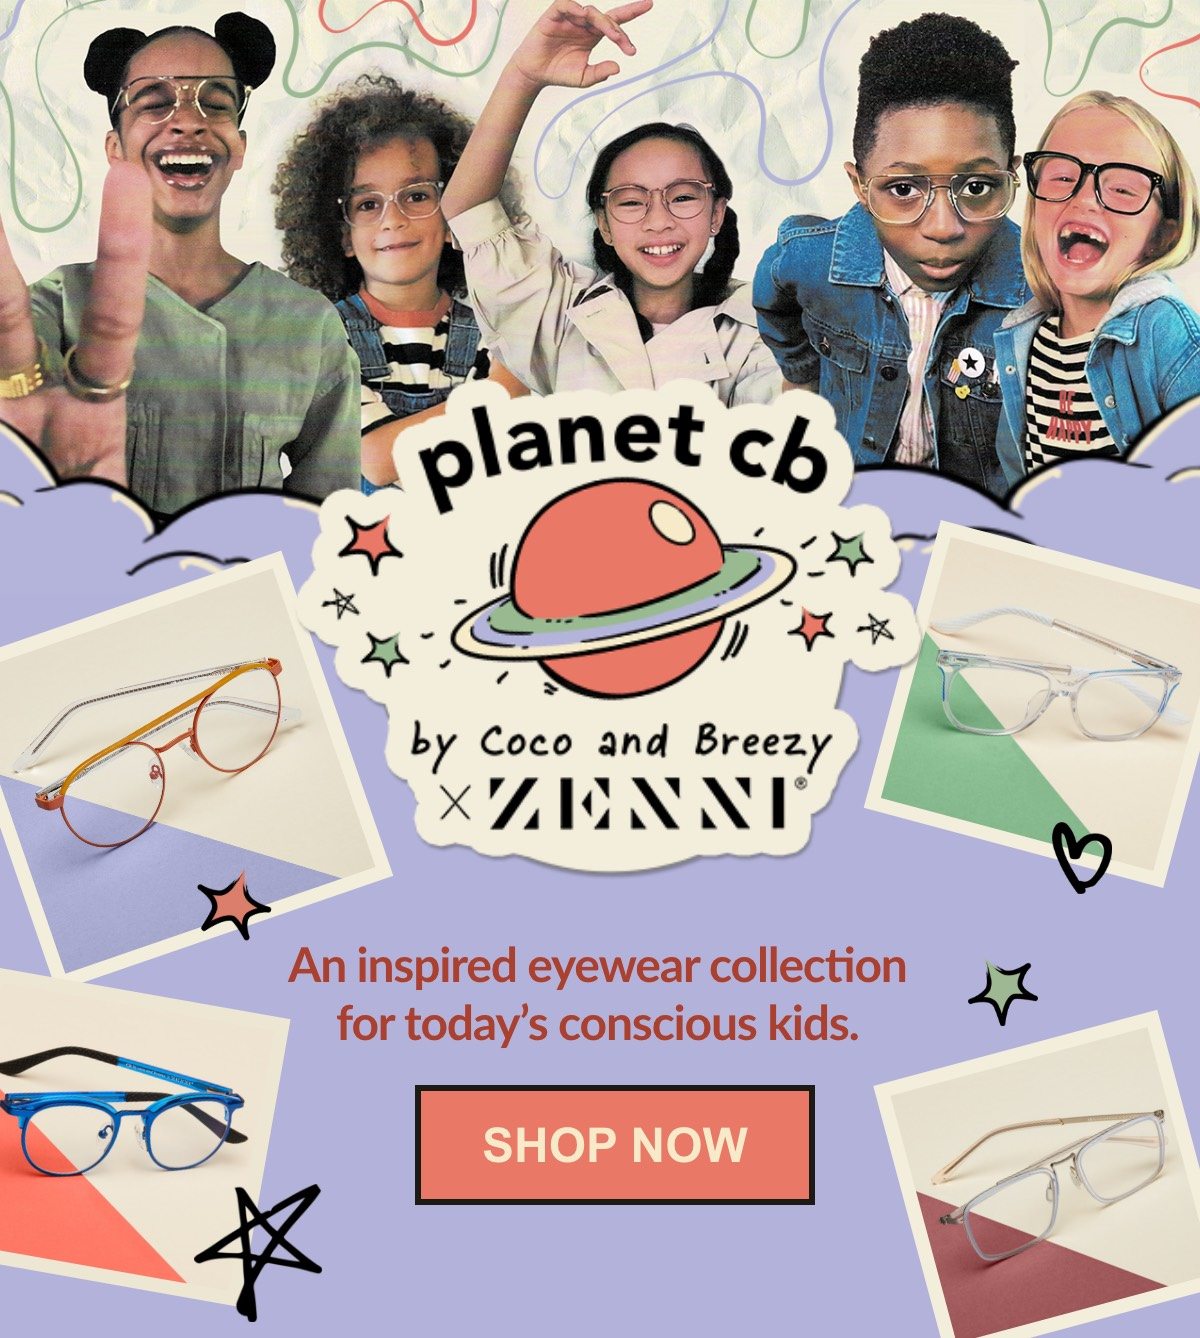 planet cb by Coco and Breezy x Zenni